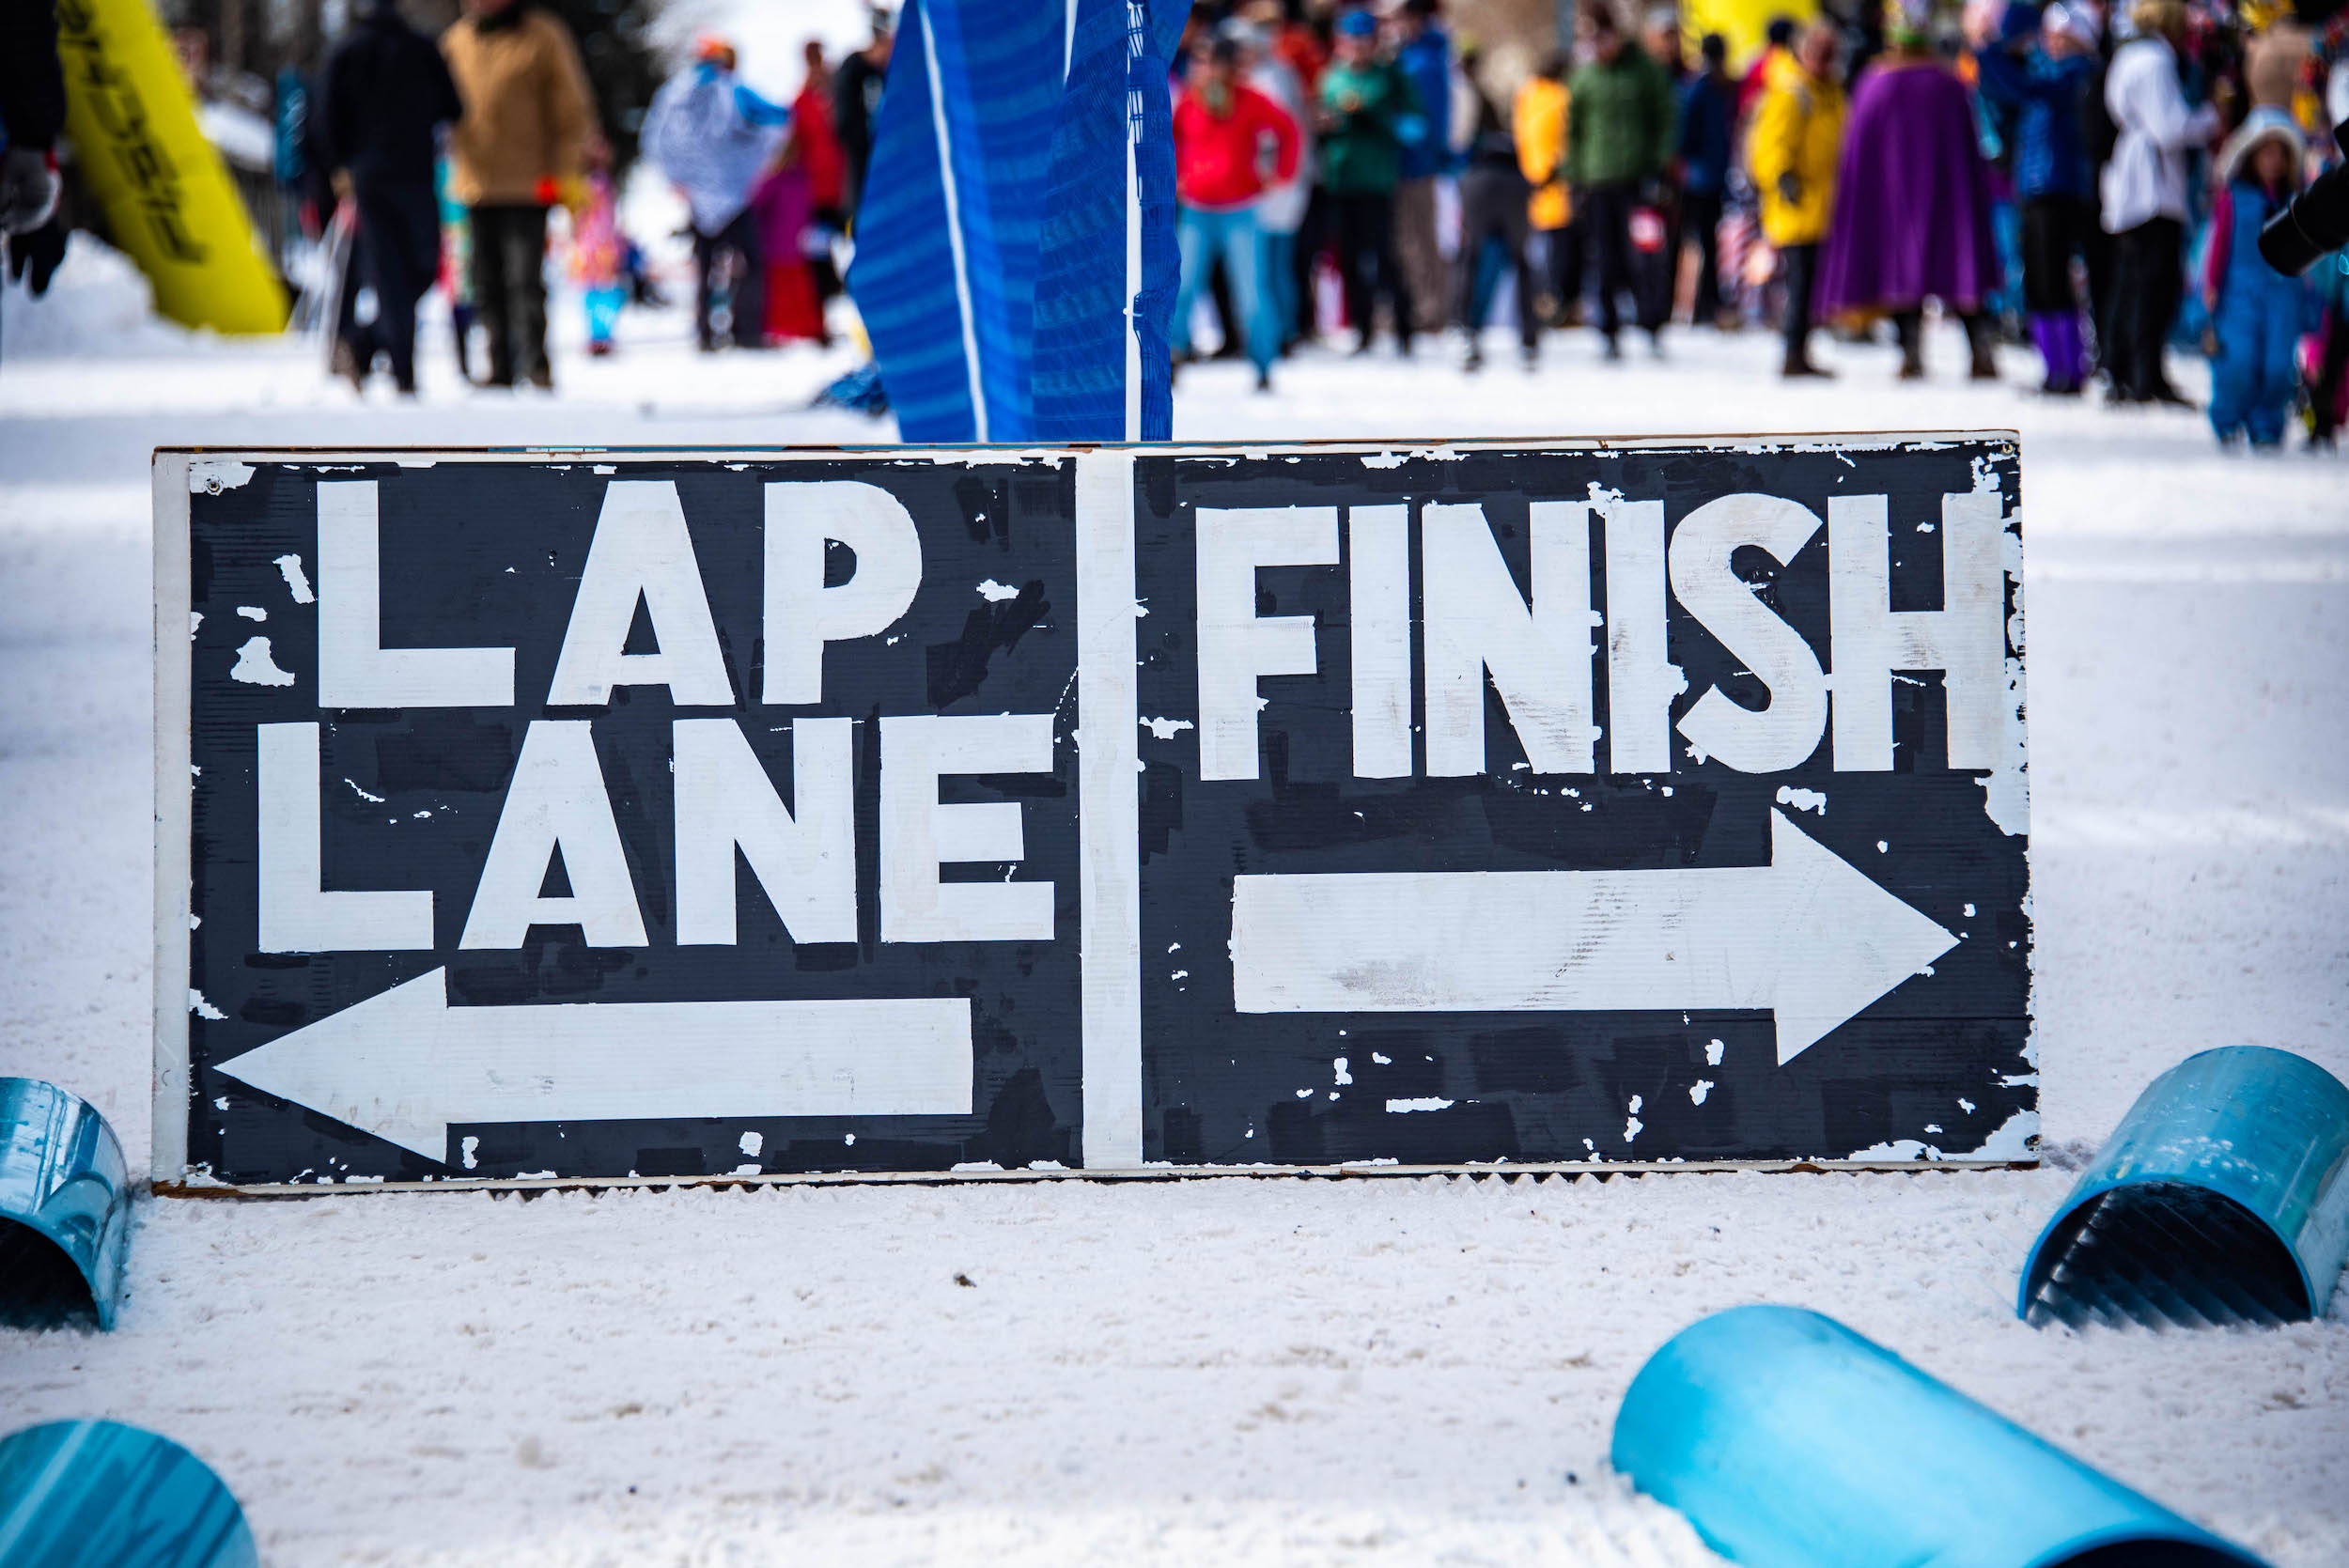 Signs that say "Lap lane" and "finish" with arrows for the alley loop crested butte